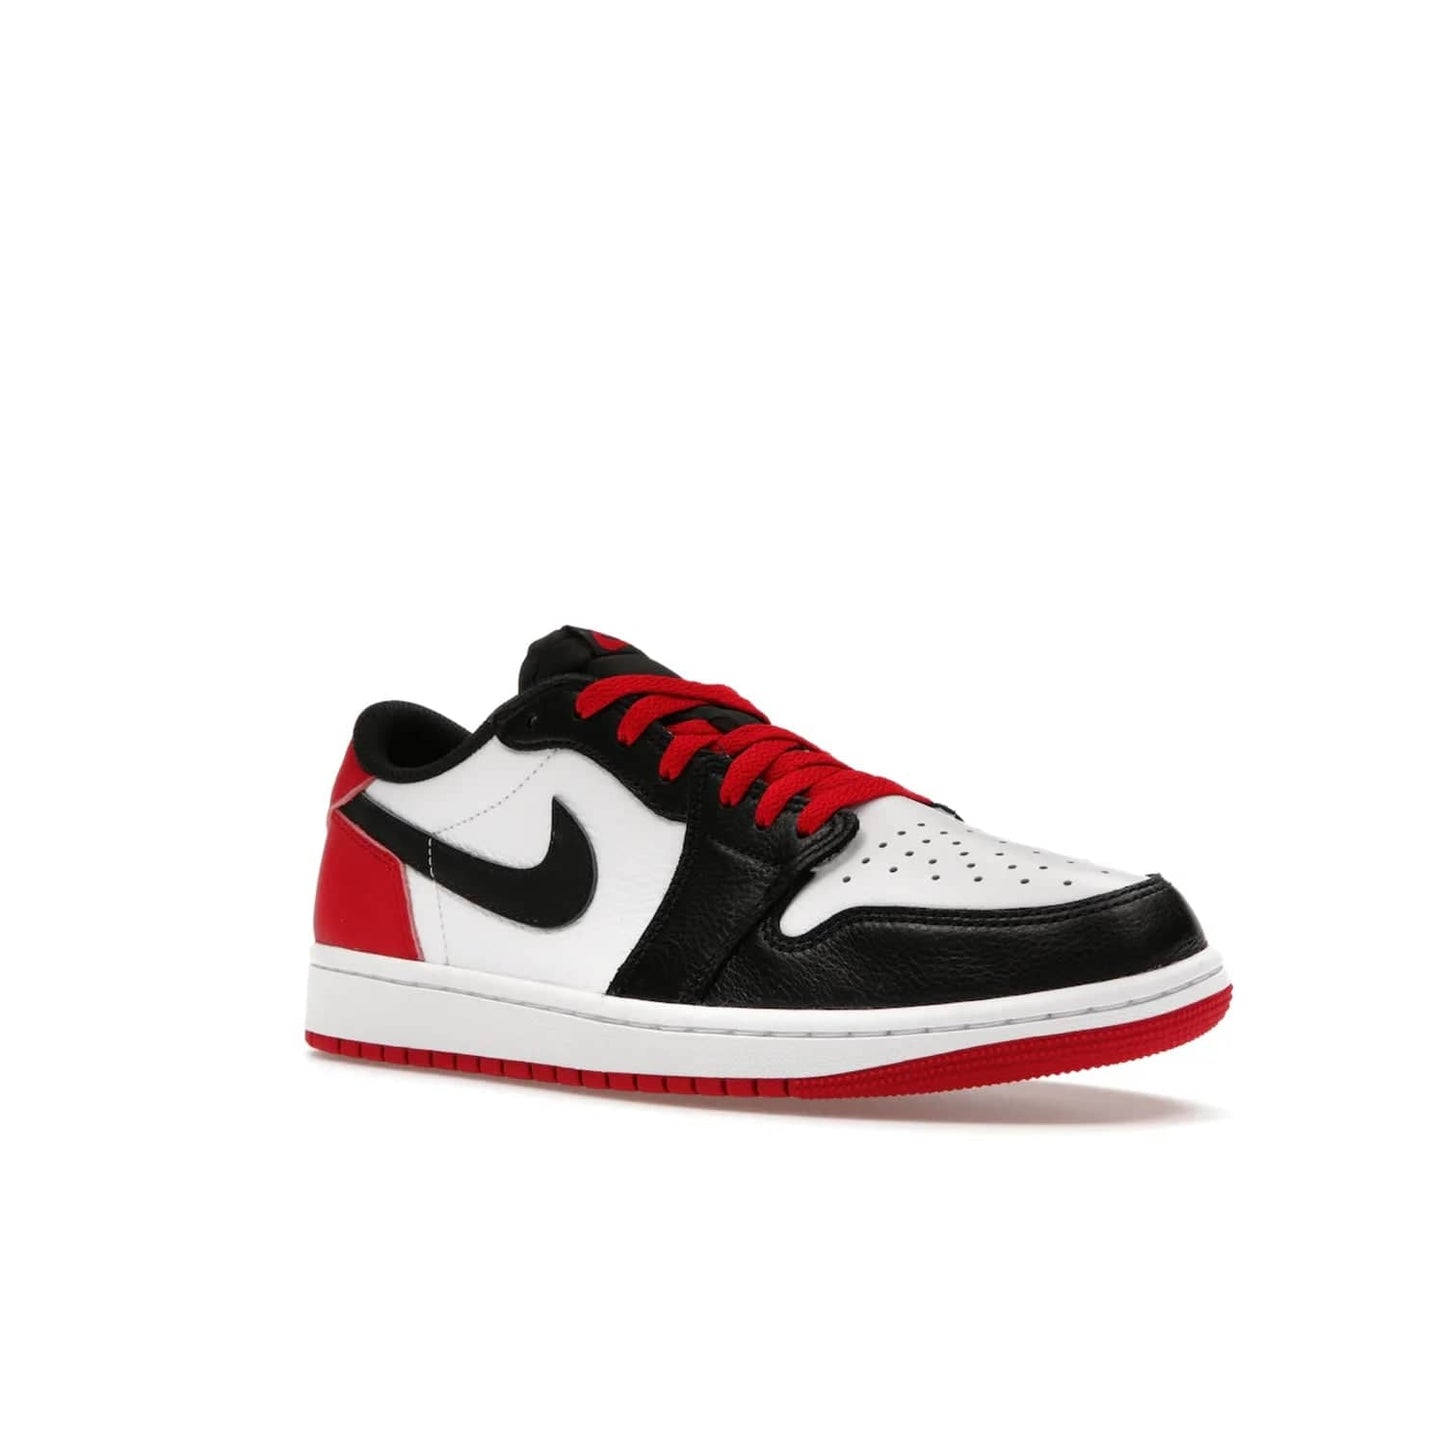 Jordan 1 Retro Low OG Black Toe (2023) - Image 5 - Only at www.BallersClubKickz.com - Upgrade your wardrobe with the Jordan 1 Retro Low OG Black Toe featuring a classic black and white upper and dynamic red heel counter. Eye-catching white midsole and iconic black Swoosh and Wings complete the timeless yet modern look. Shop now to own this iconic shoe!